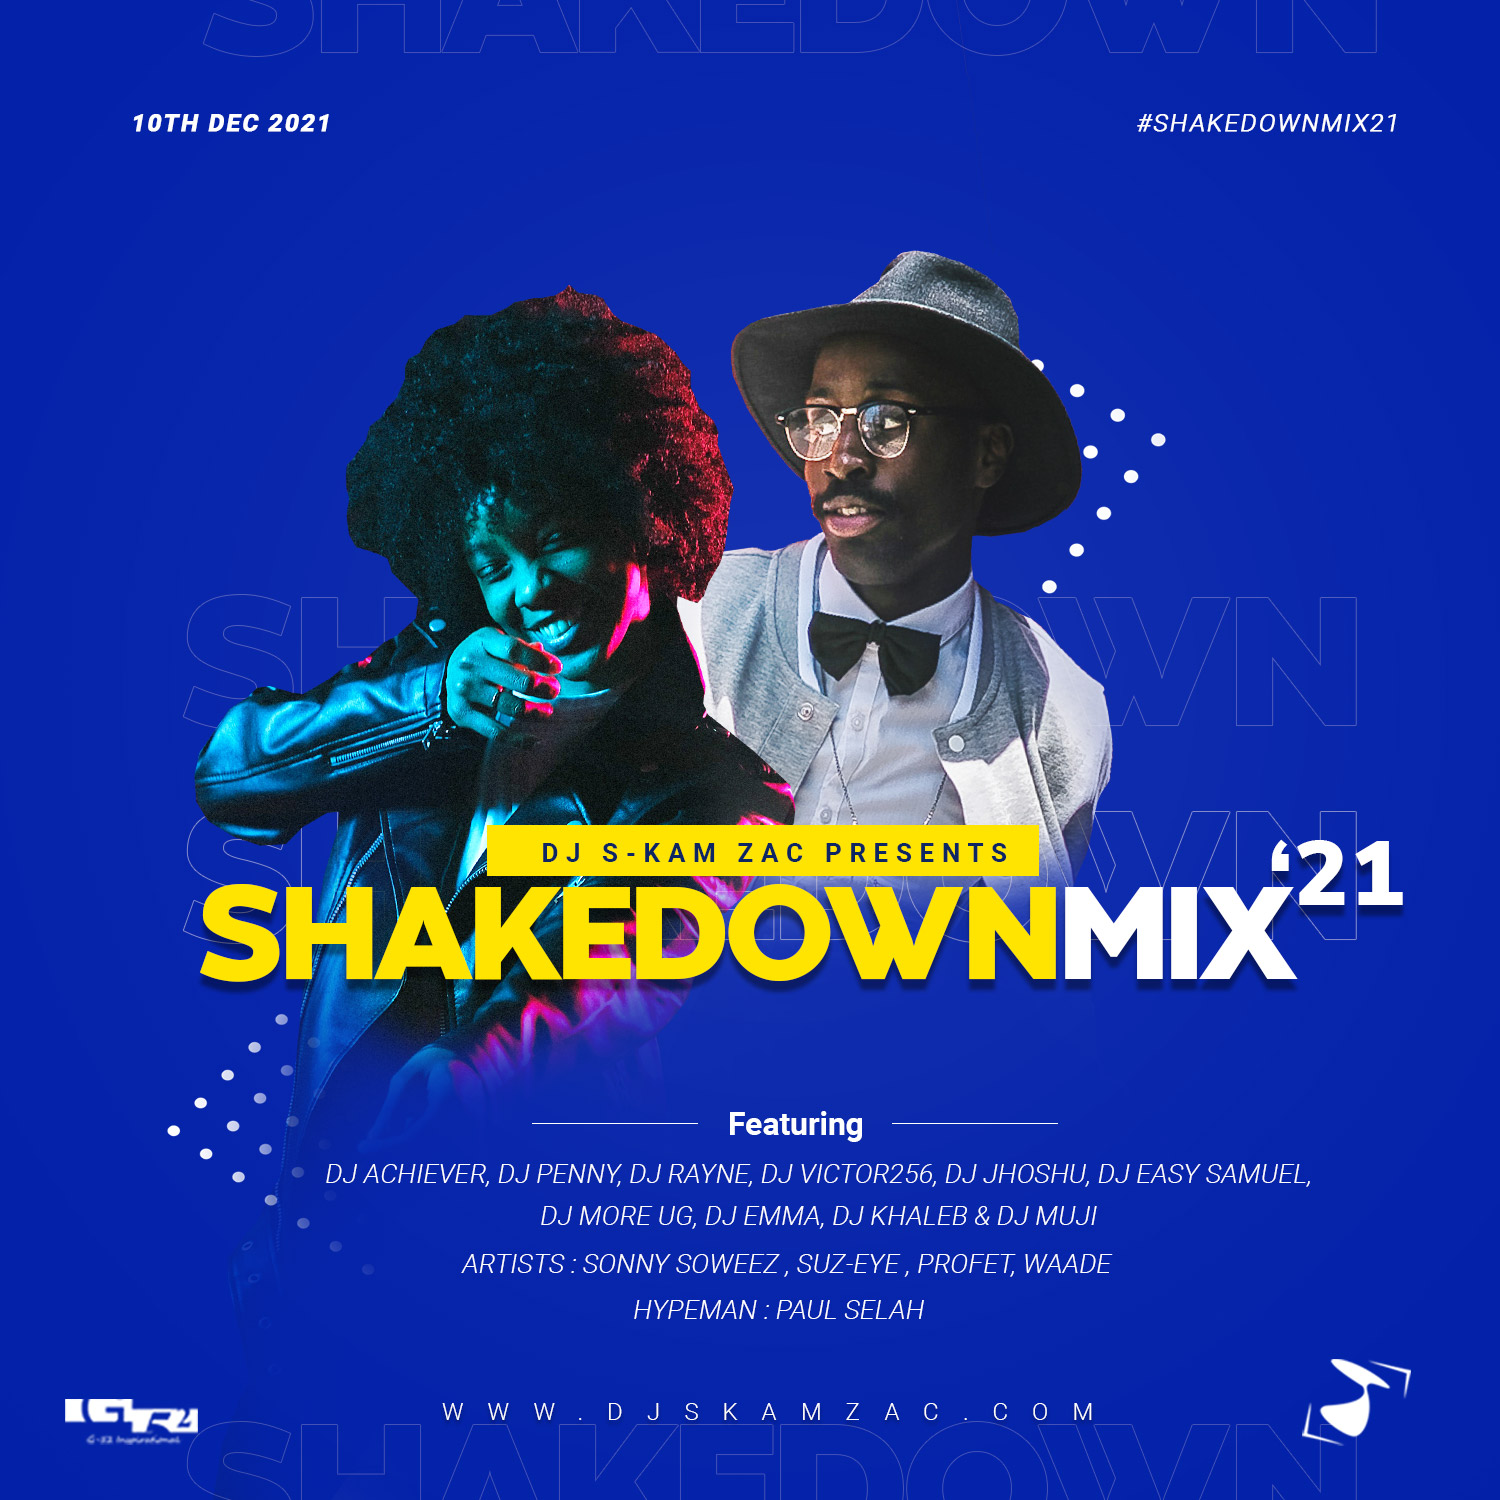 The ShakedownMix 2021 - The Ultimate Party Experience